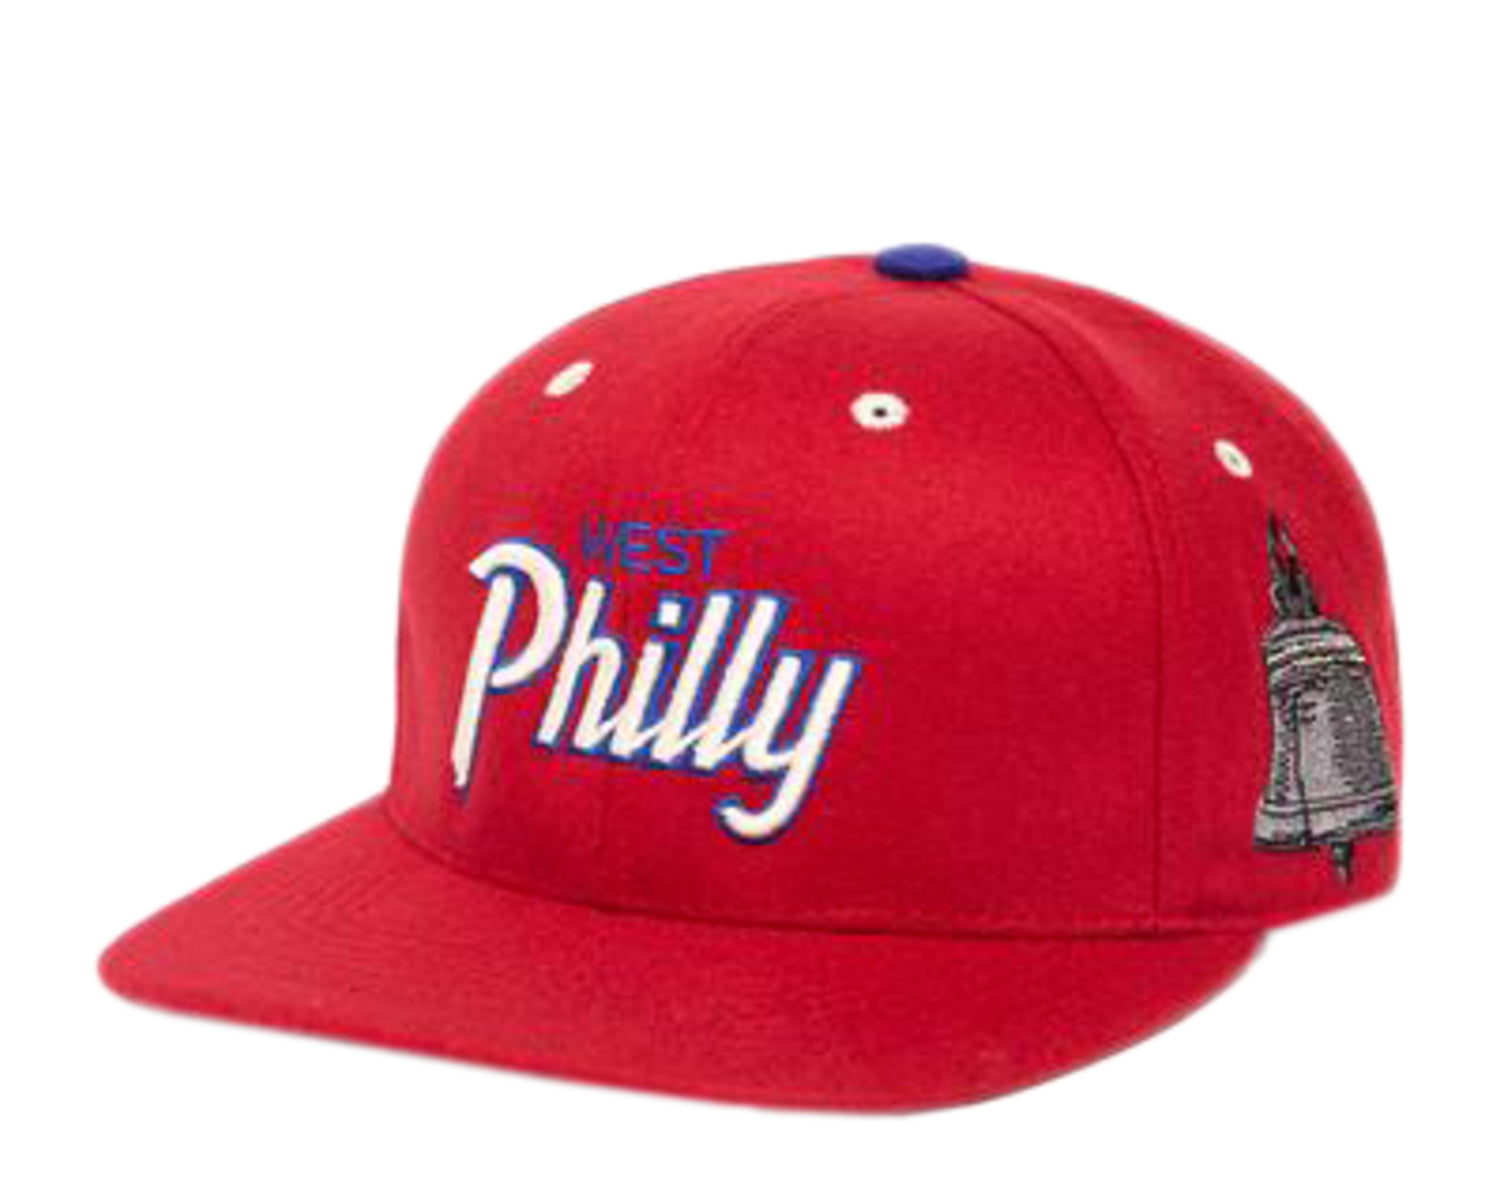 Hood Hat USA Fresh West Philly Wool with Leather Strapback